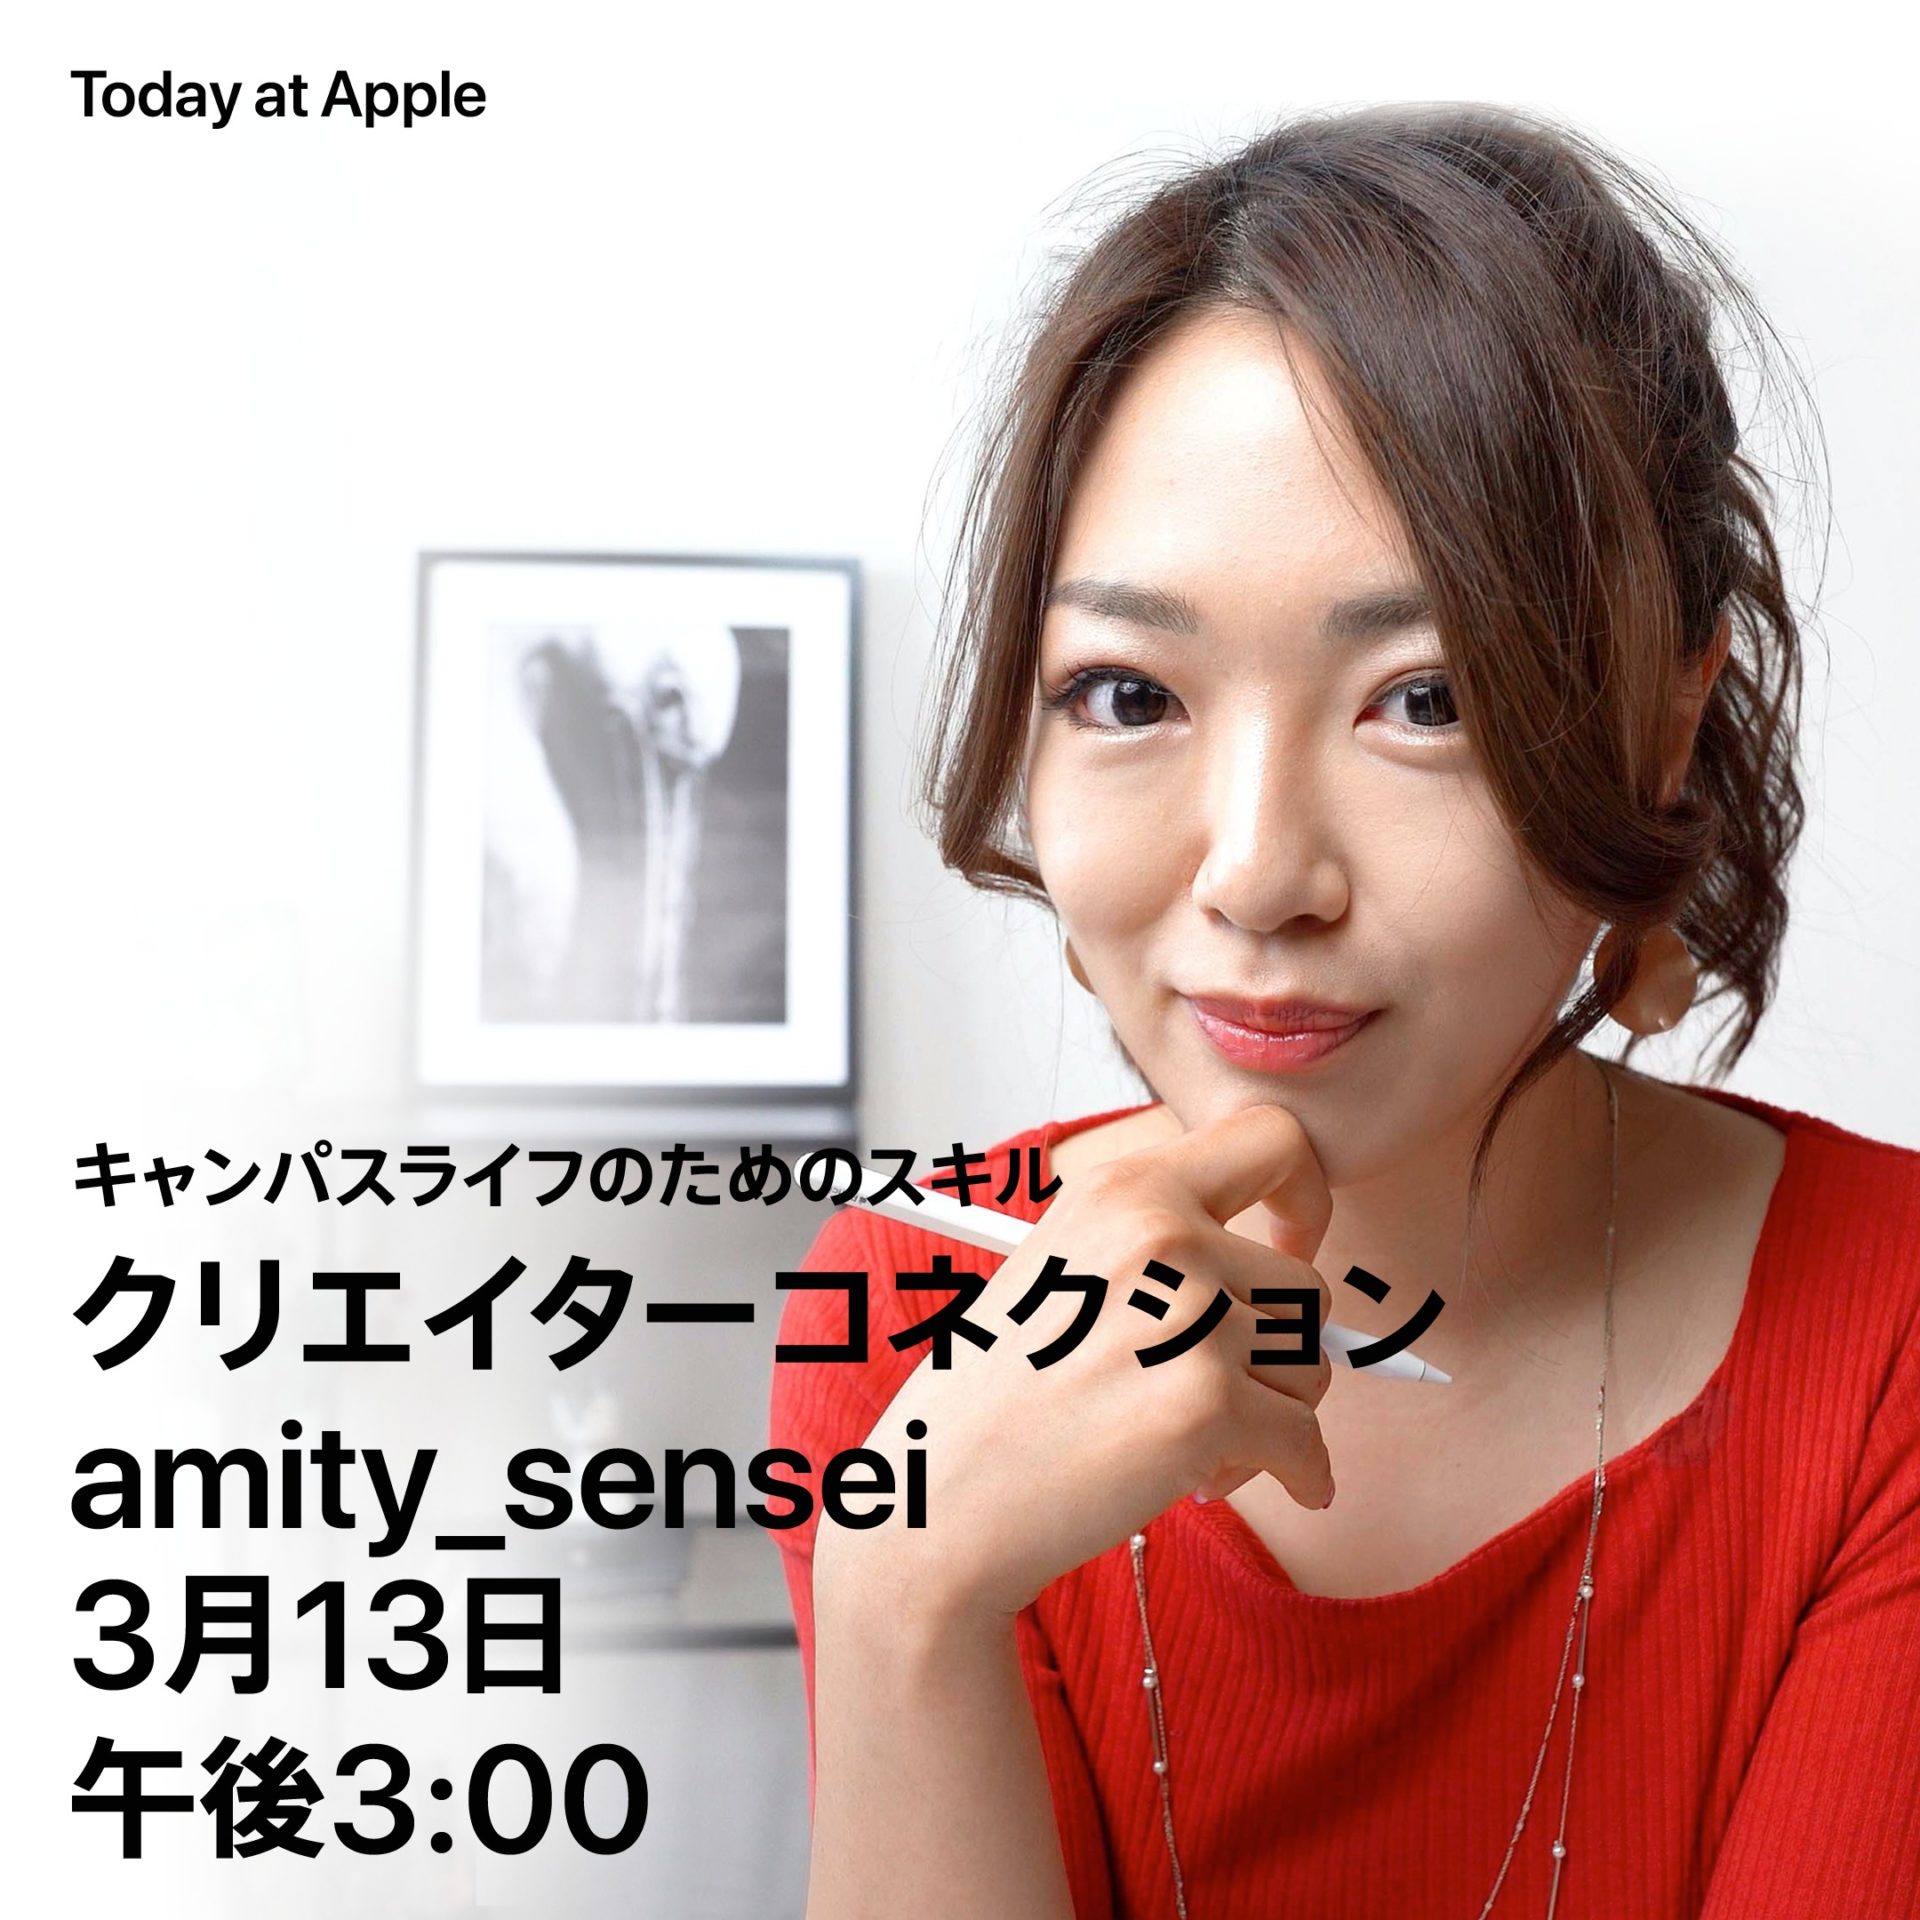 Today at Apple 丸の内店